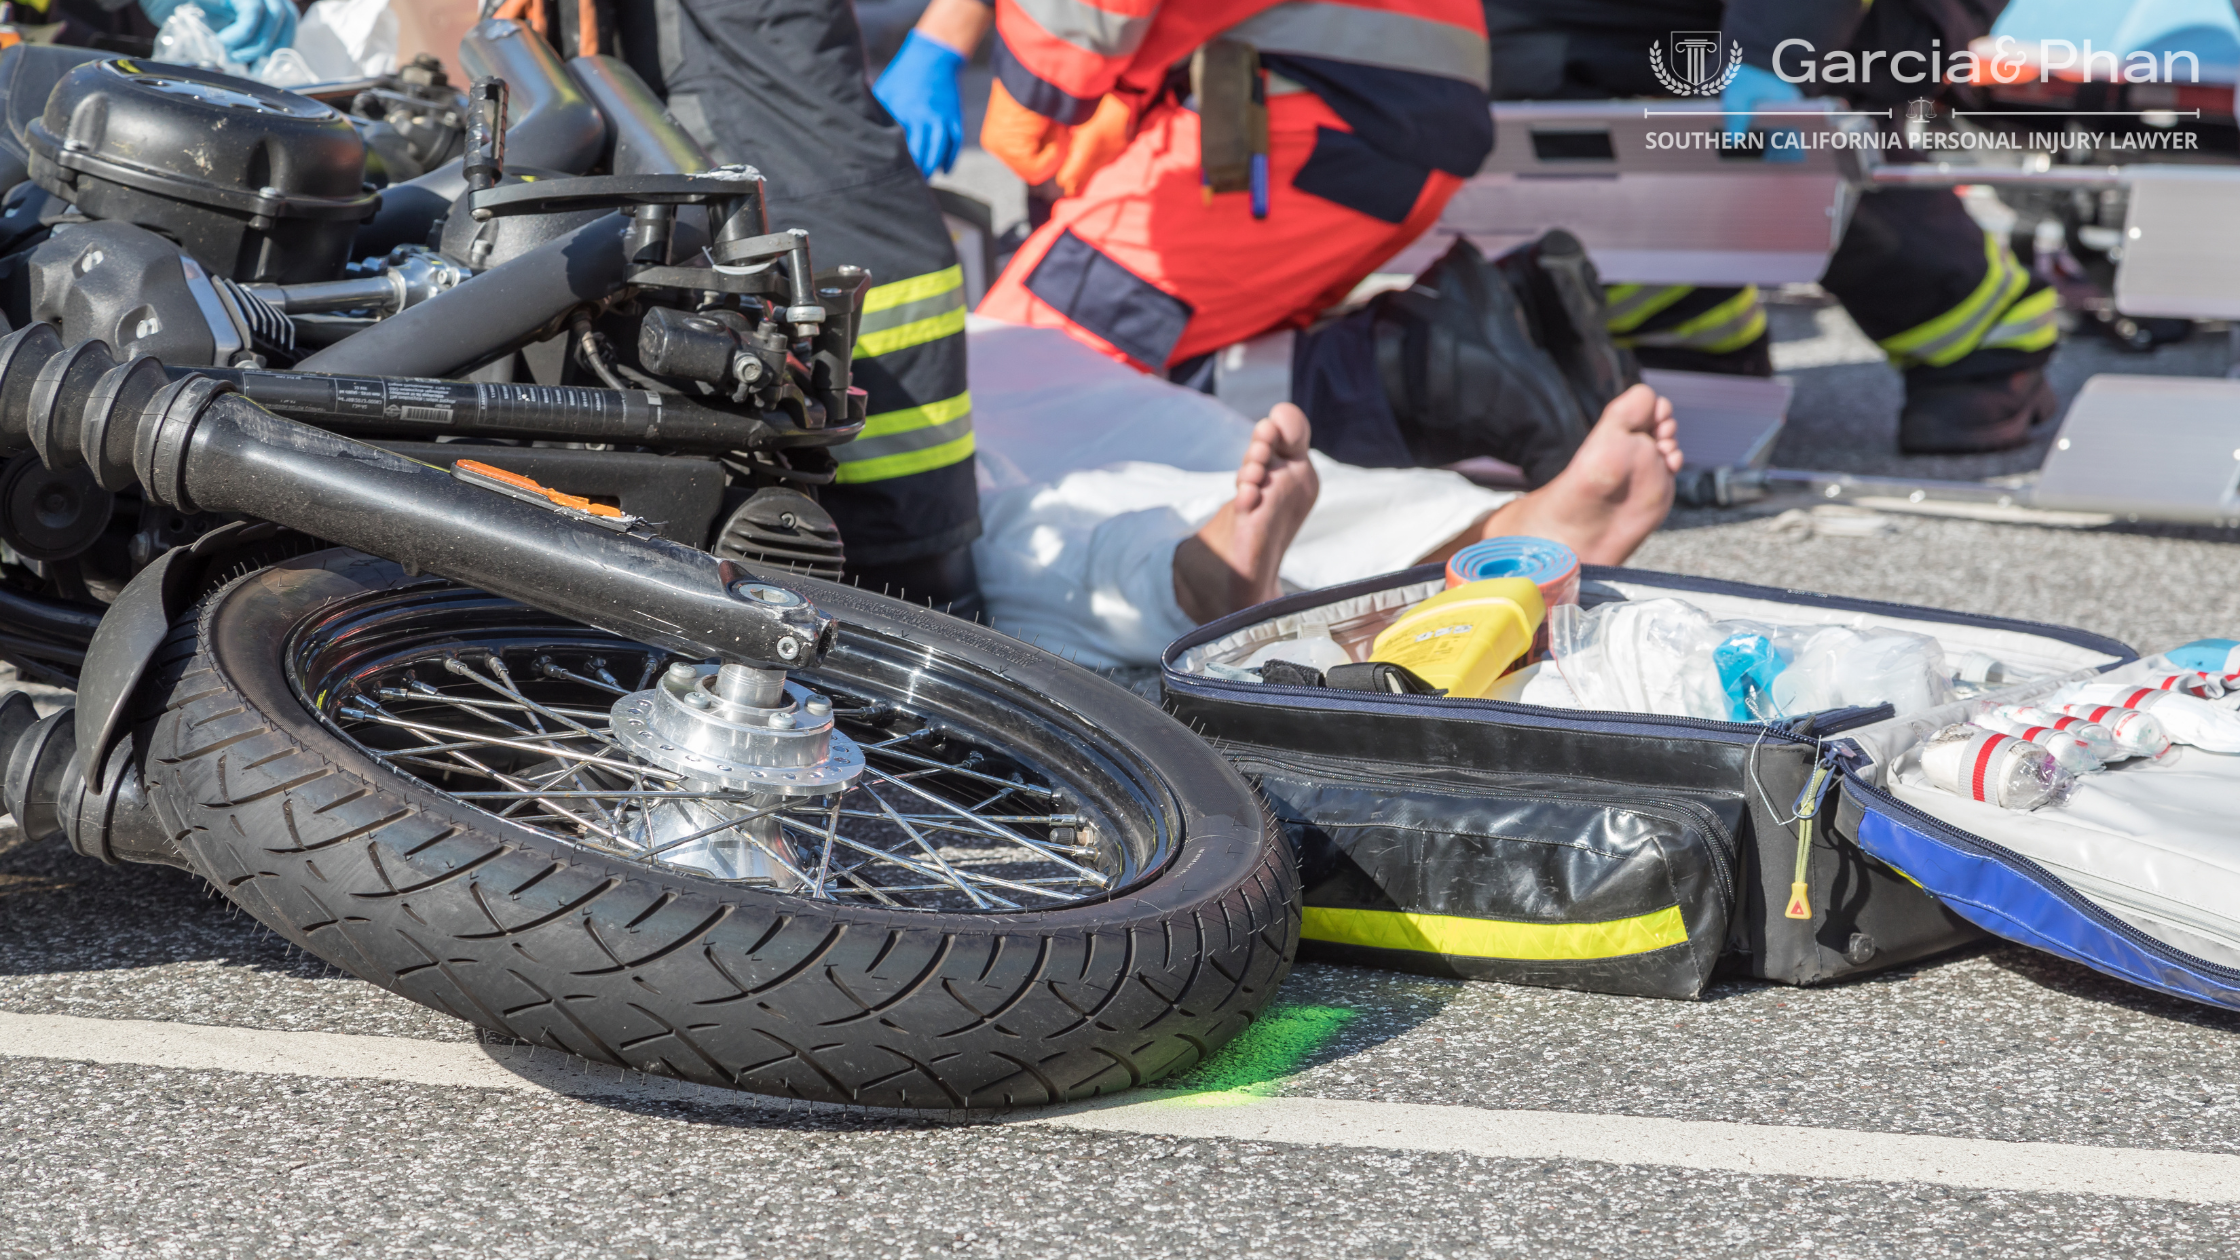 Overview of Fault and Liability in California Motorcycle Accidents | Garcia Phan